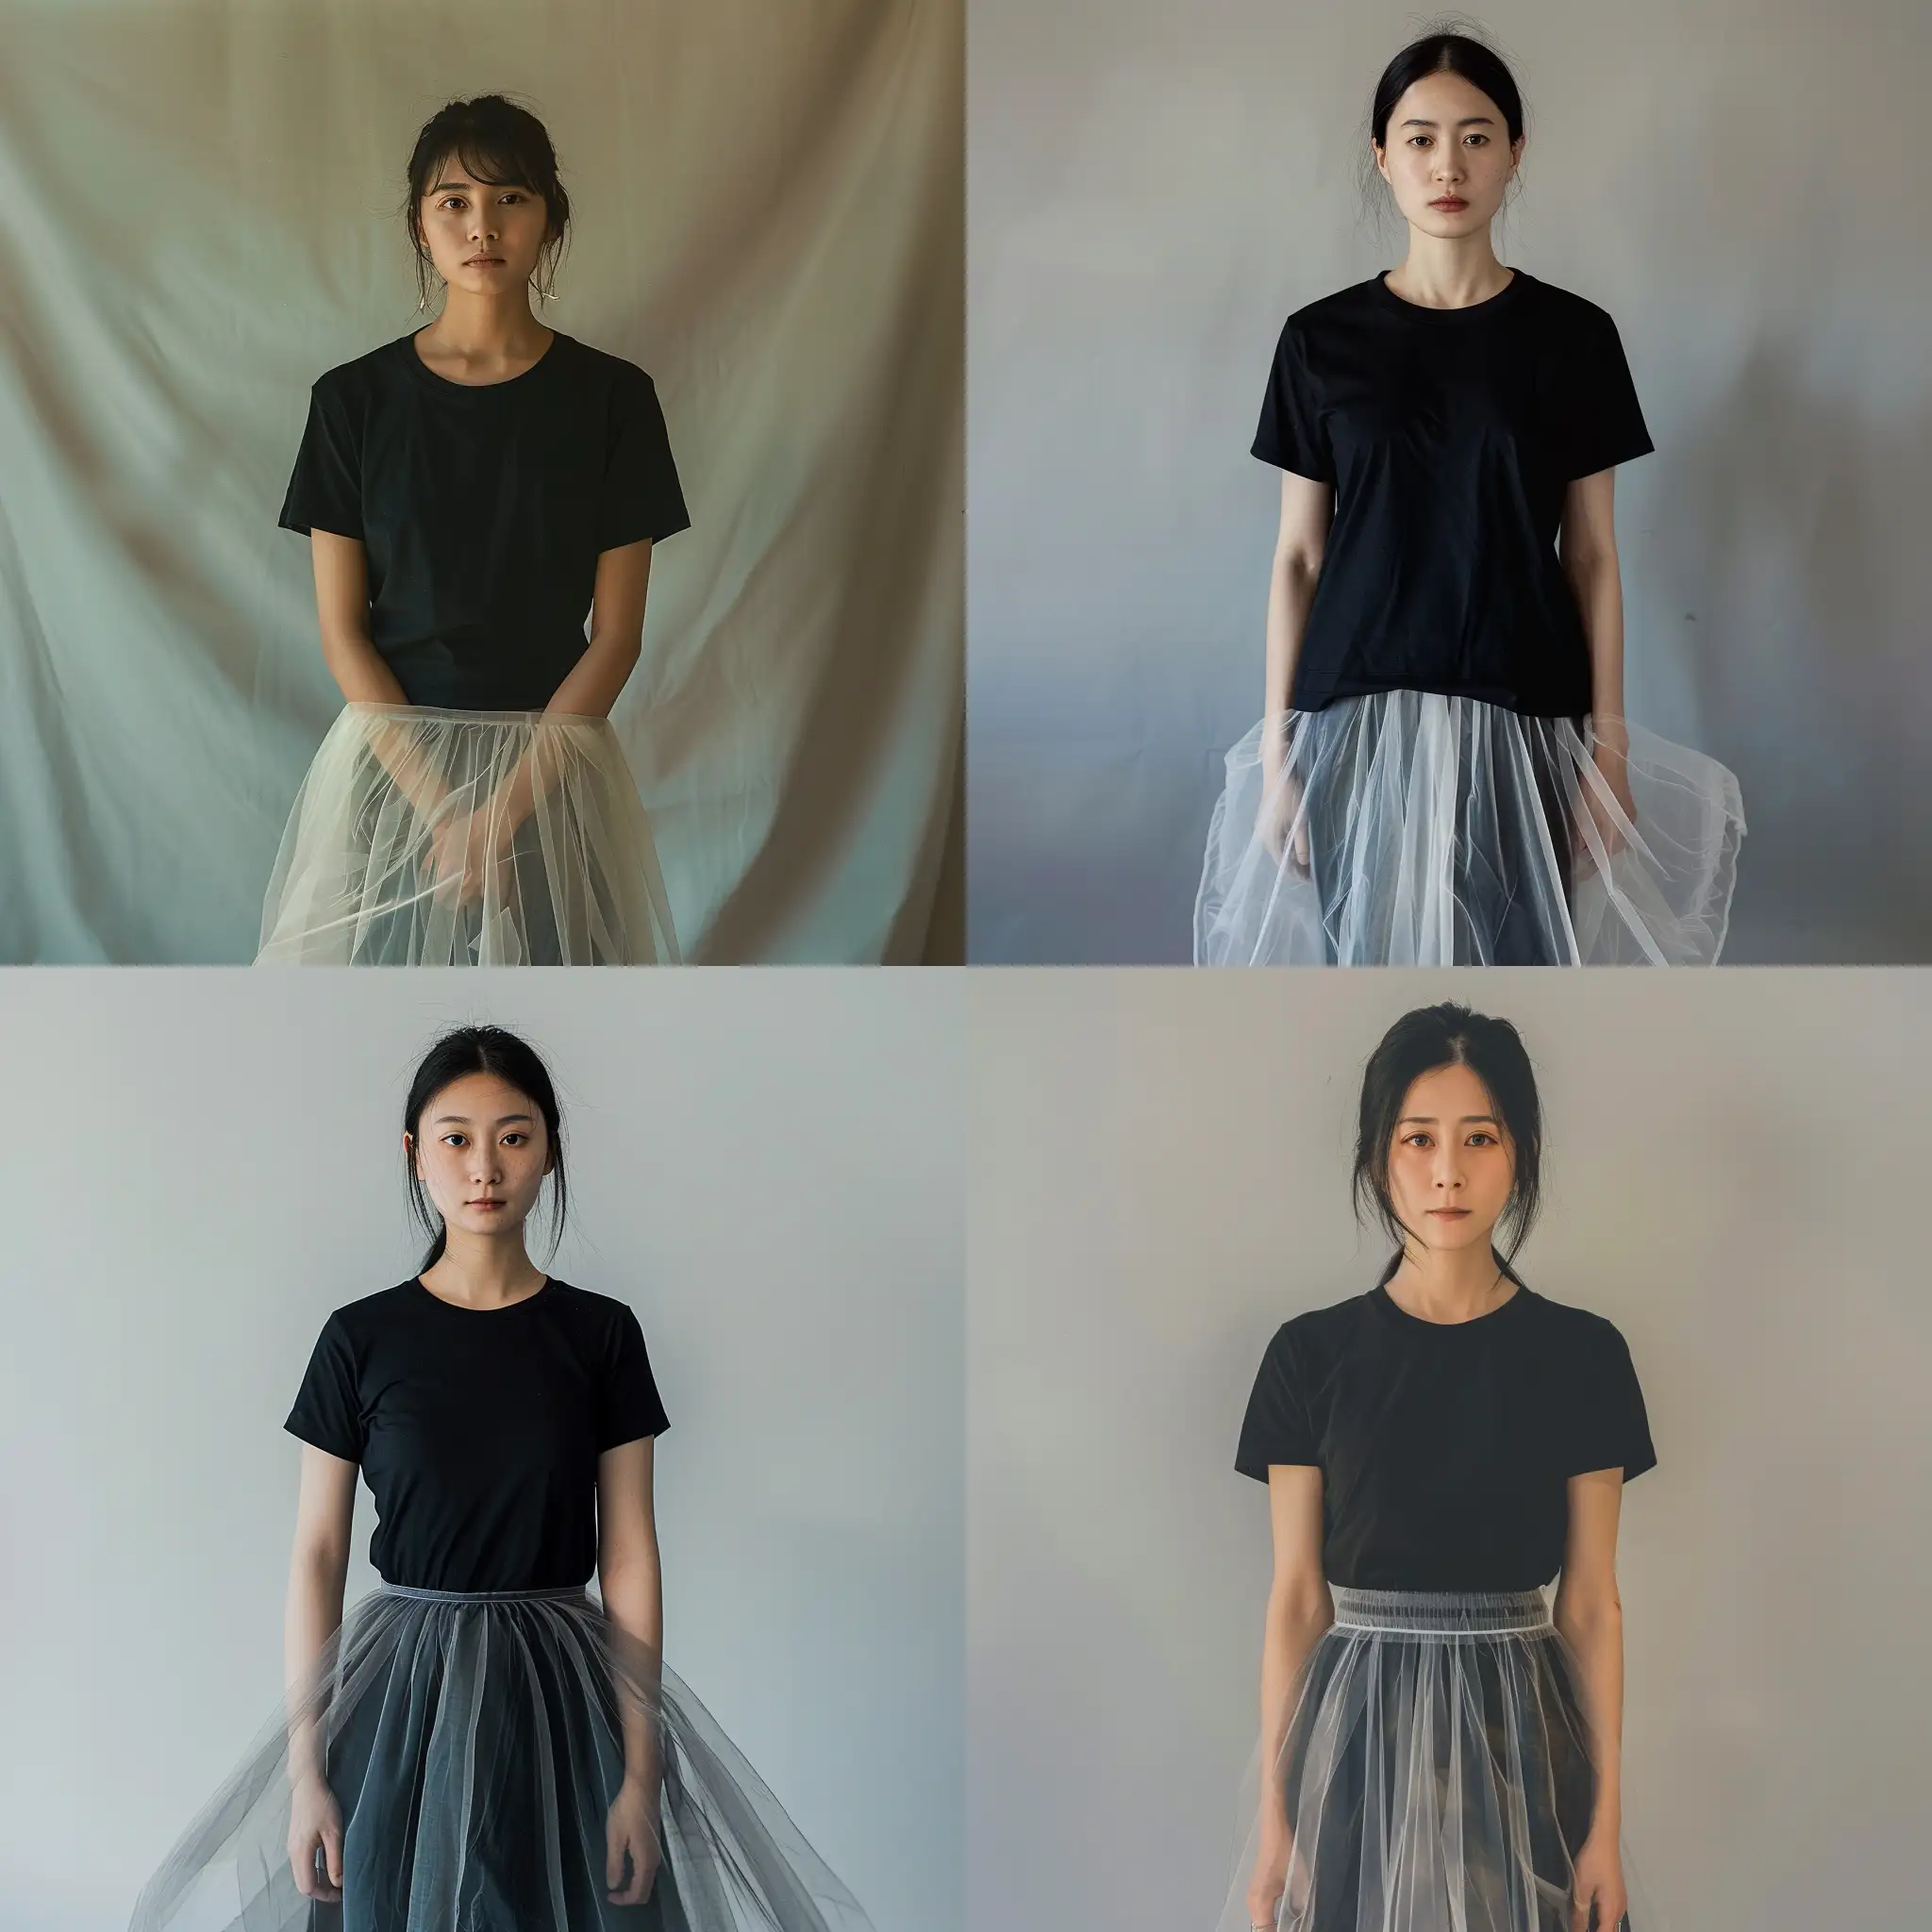 Ren-Hang-Style-Portrait-Woman-in-Black-TShirt-and-Translucent-Skirt